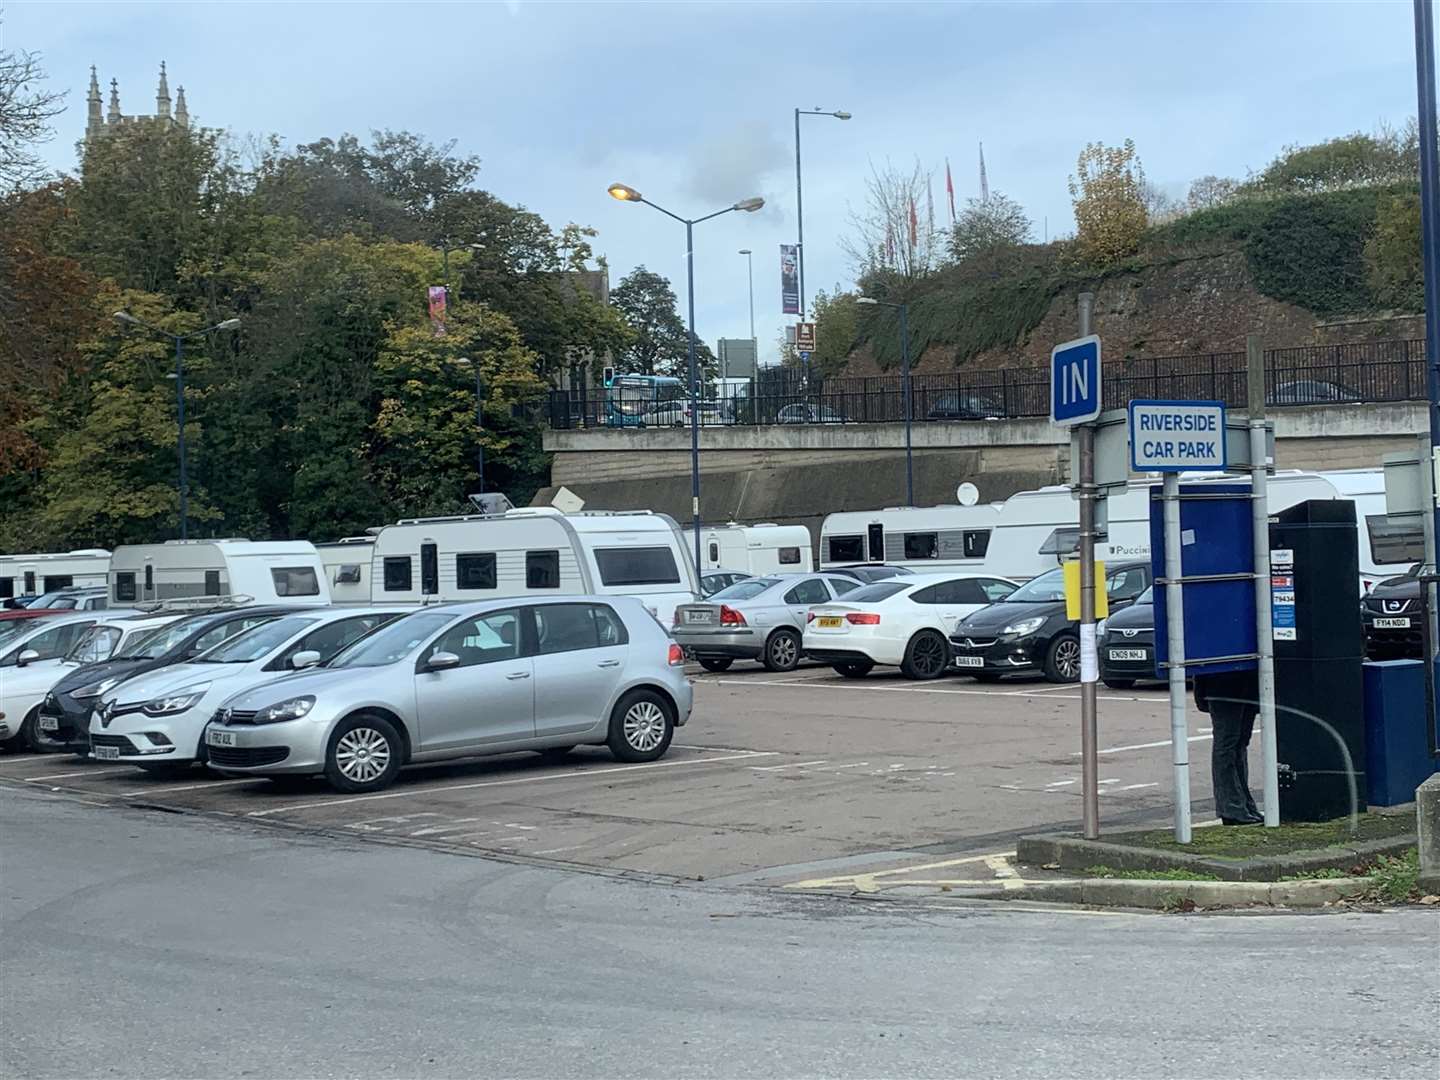 Cavarans pitched up in the Riverside car park in Chatham on Wednesday, November 6. (21027072)